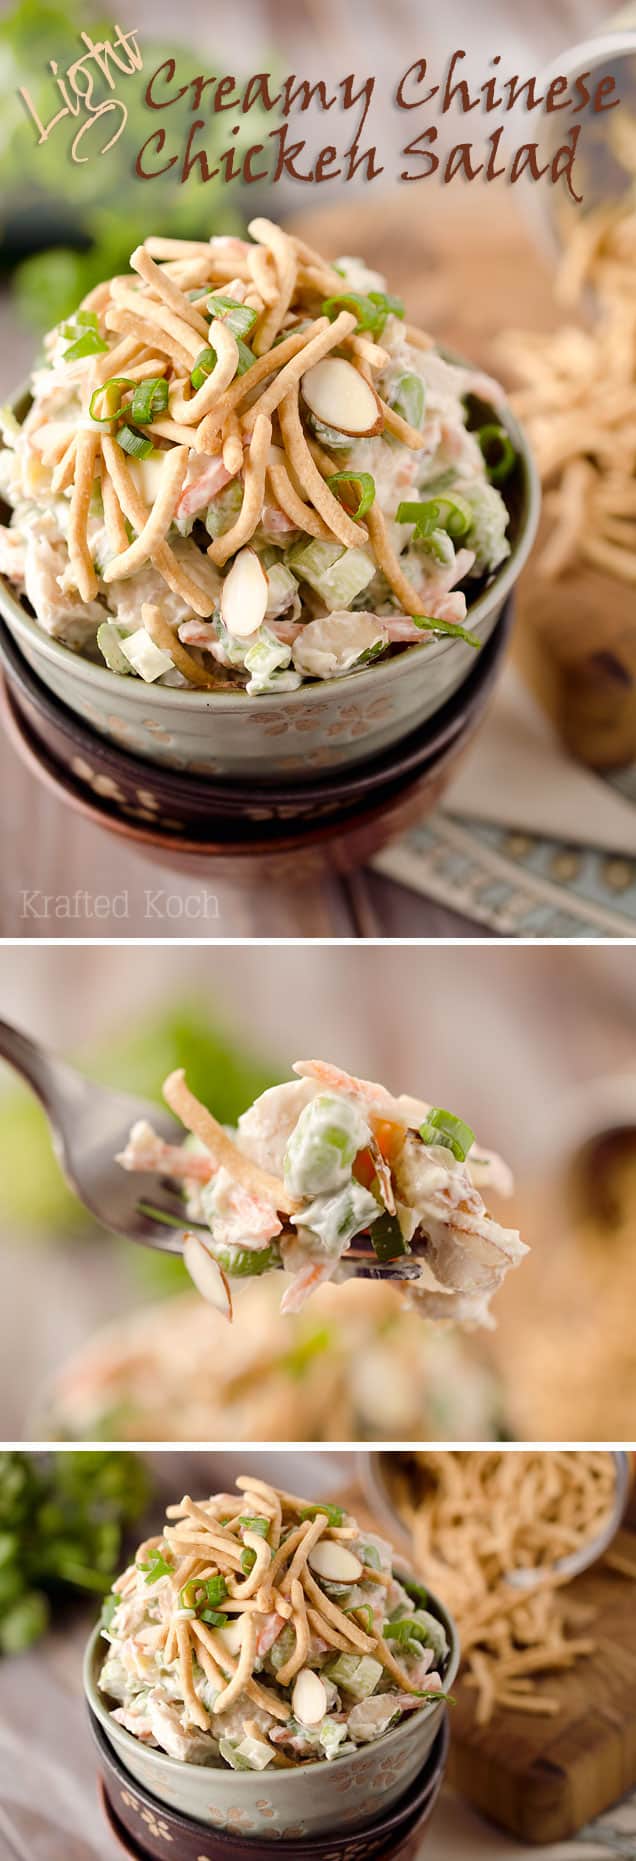 Light Creamy Chinese Chicken Salad is a quick and simple lunch recipe made with Greek yogurt for a healthy meal you will love! #Light #Lunch #Healthy #ChickenSalad #Chinese